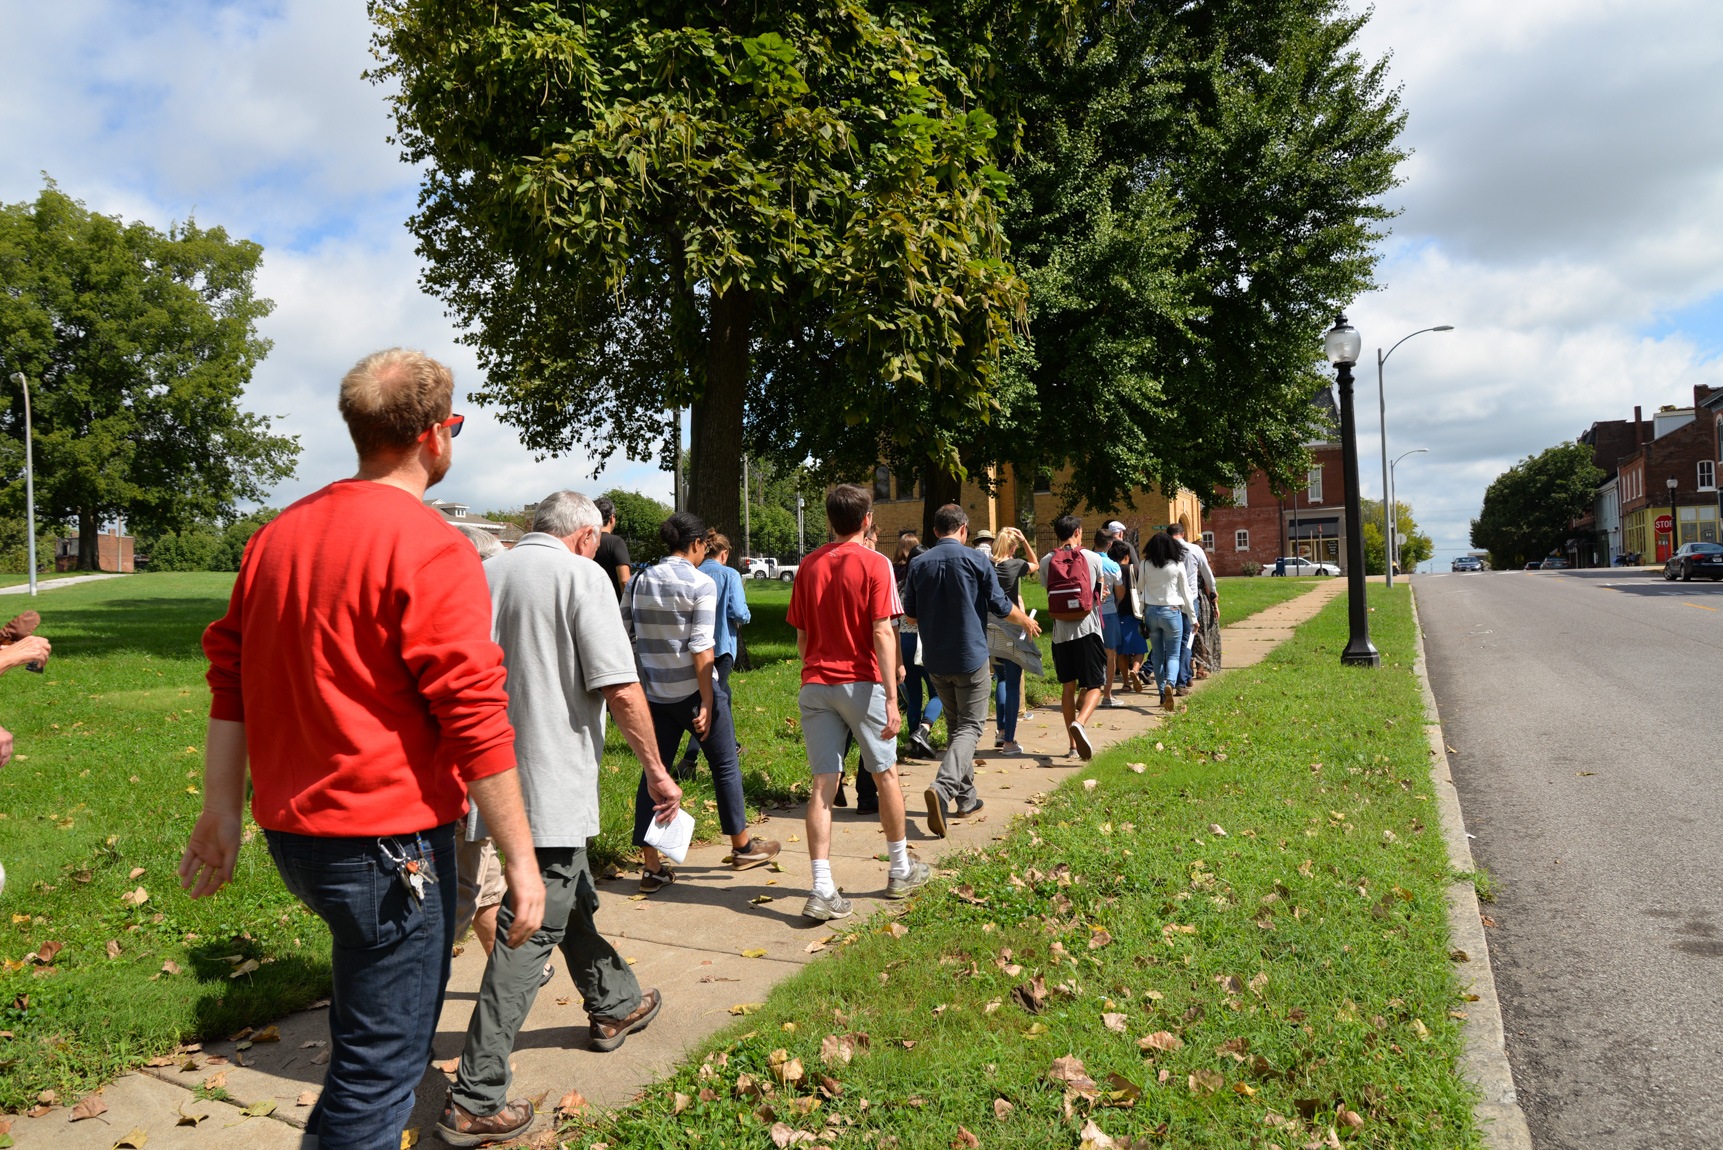 A line of field trip participants walks down a residential sidewalk on a sunny day.